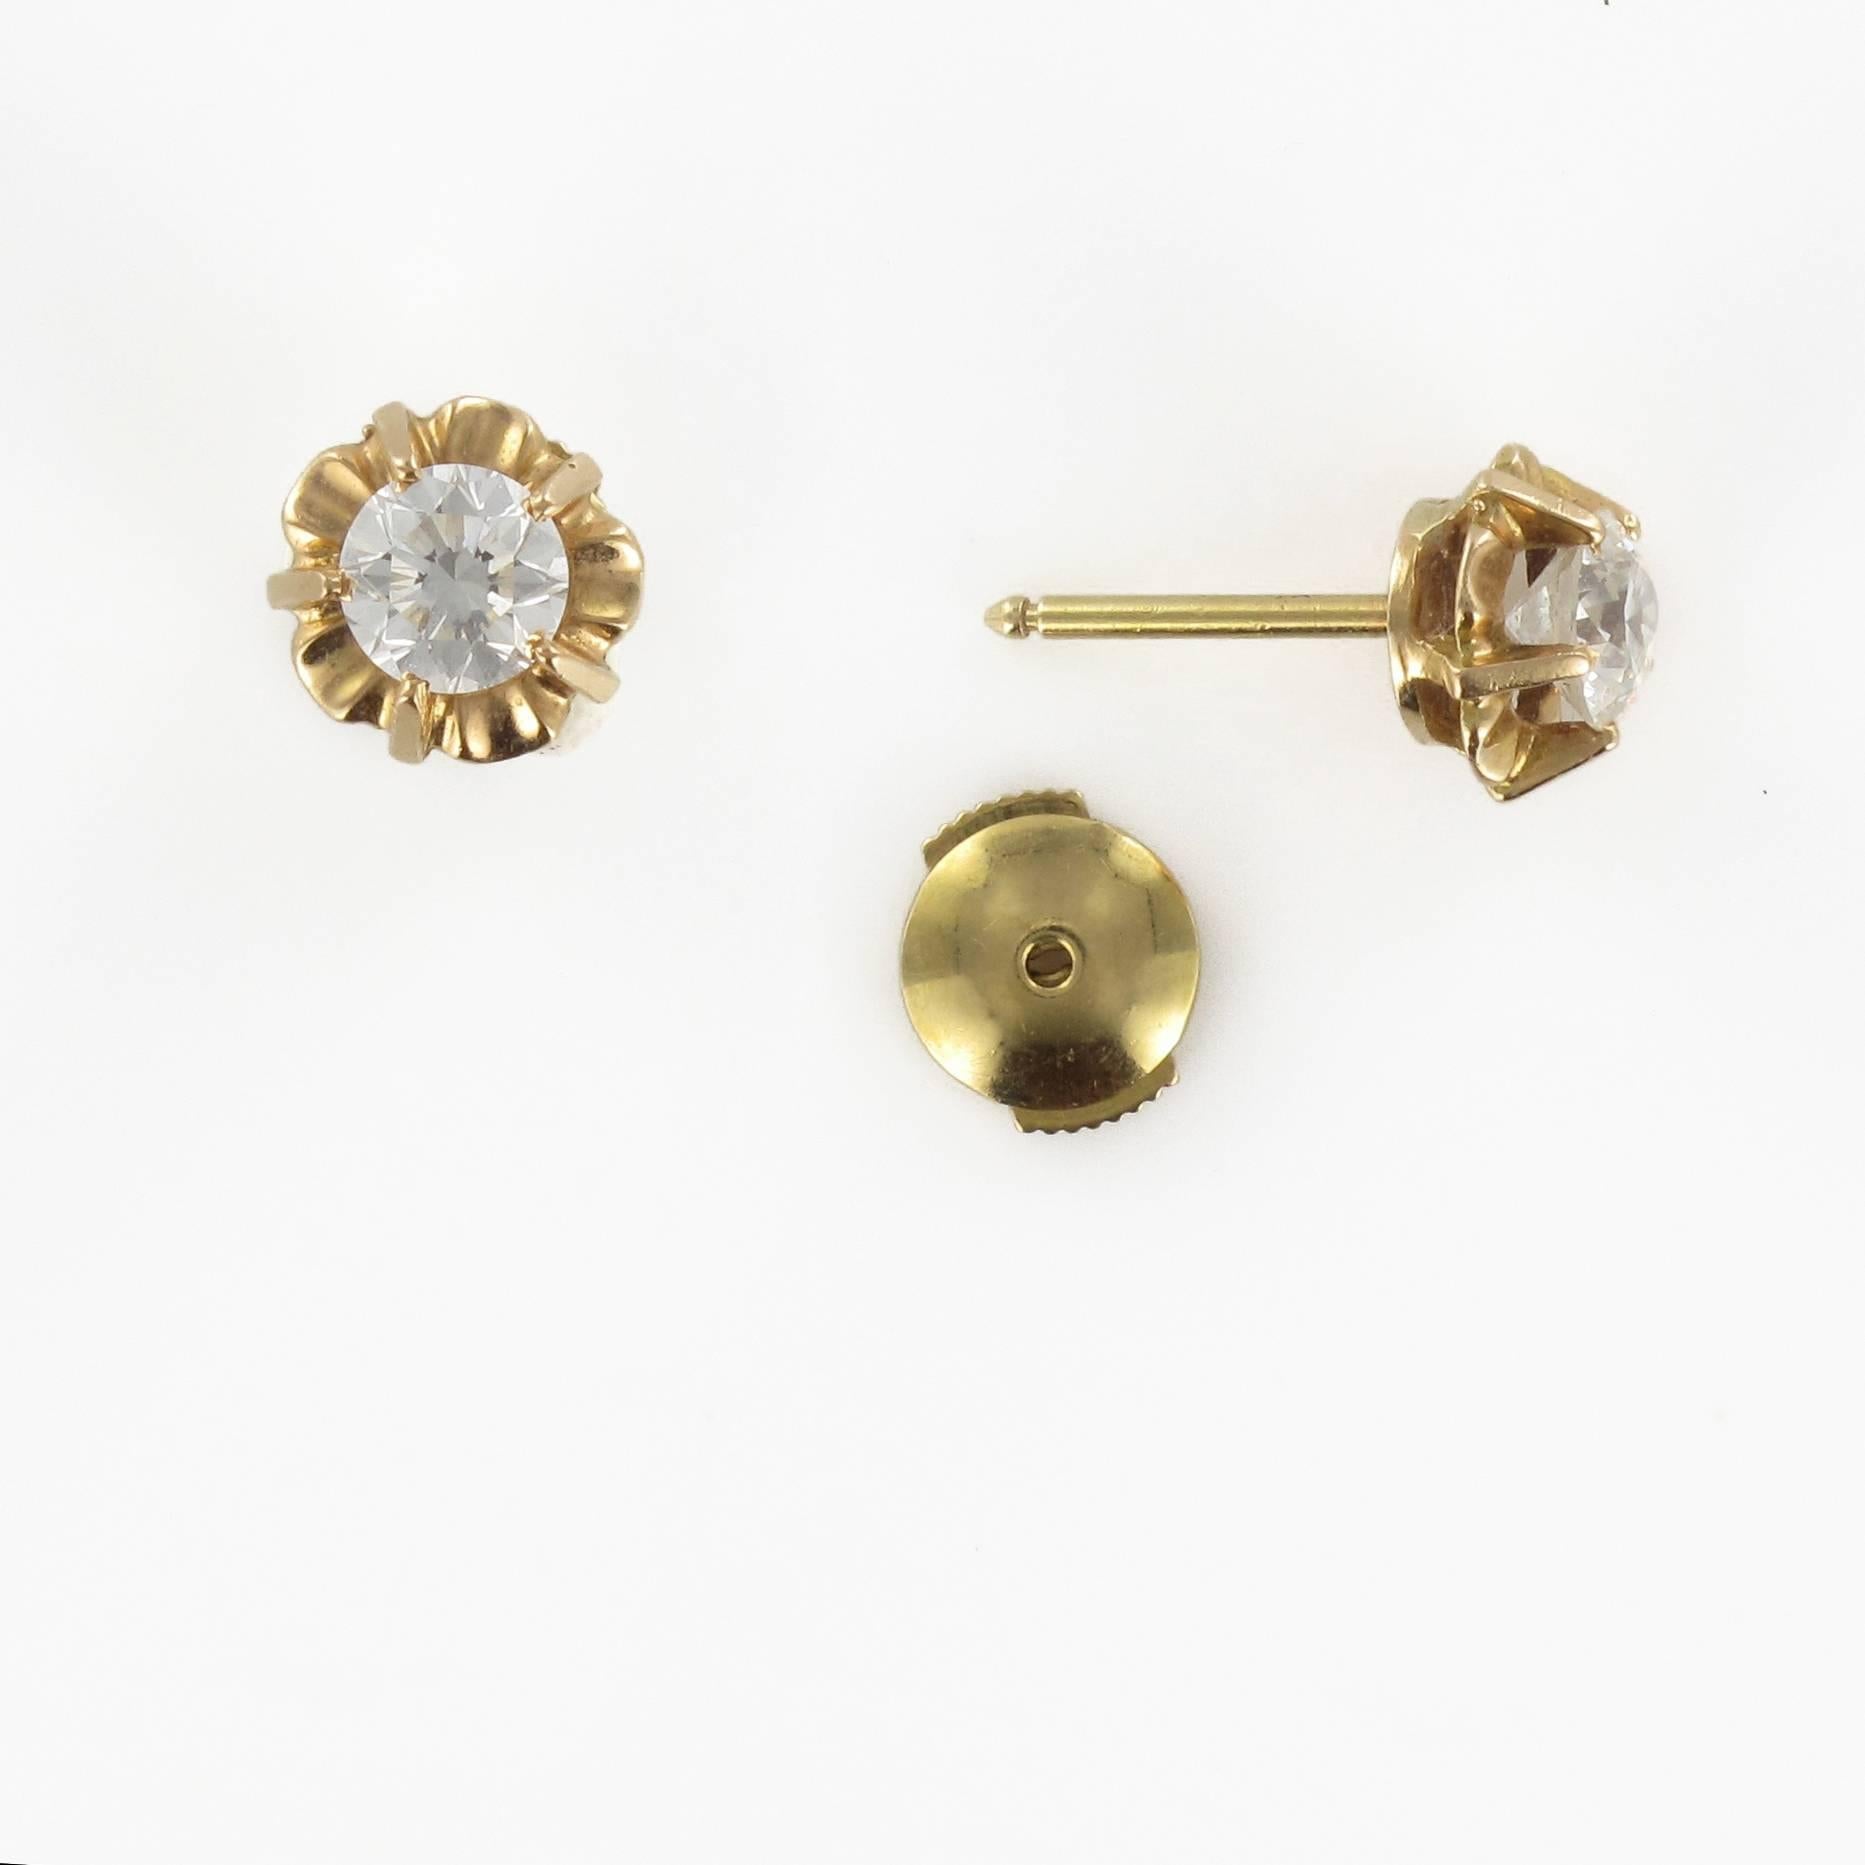 Earrings in 18 carat yellow gold. 

These superb earring studs are different to the typical style stud earrings. These are composed of radiant white brilliant cut diamonds claw set in a ‘Sun’ style setting which enhances the size and brilliance of